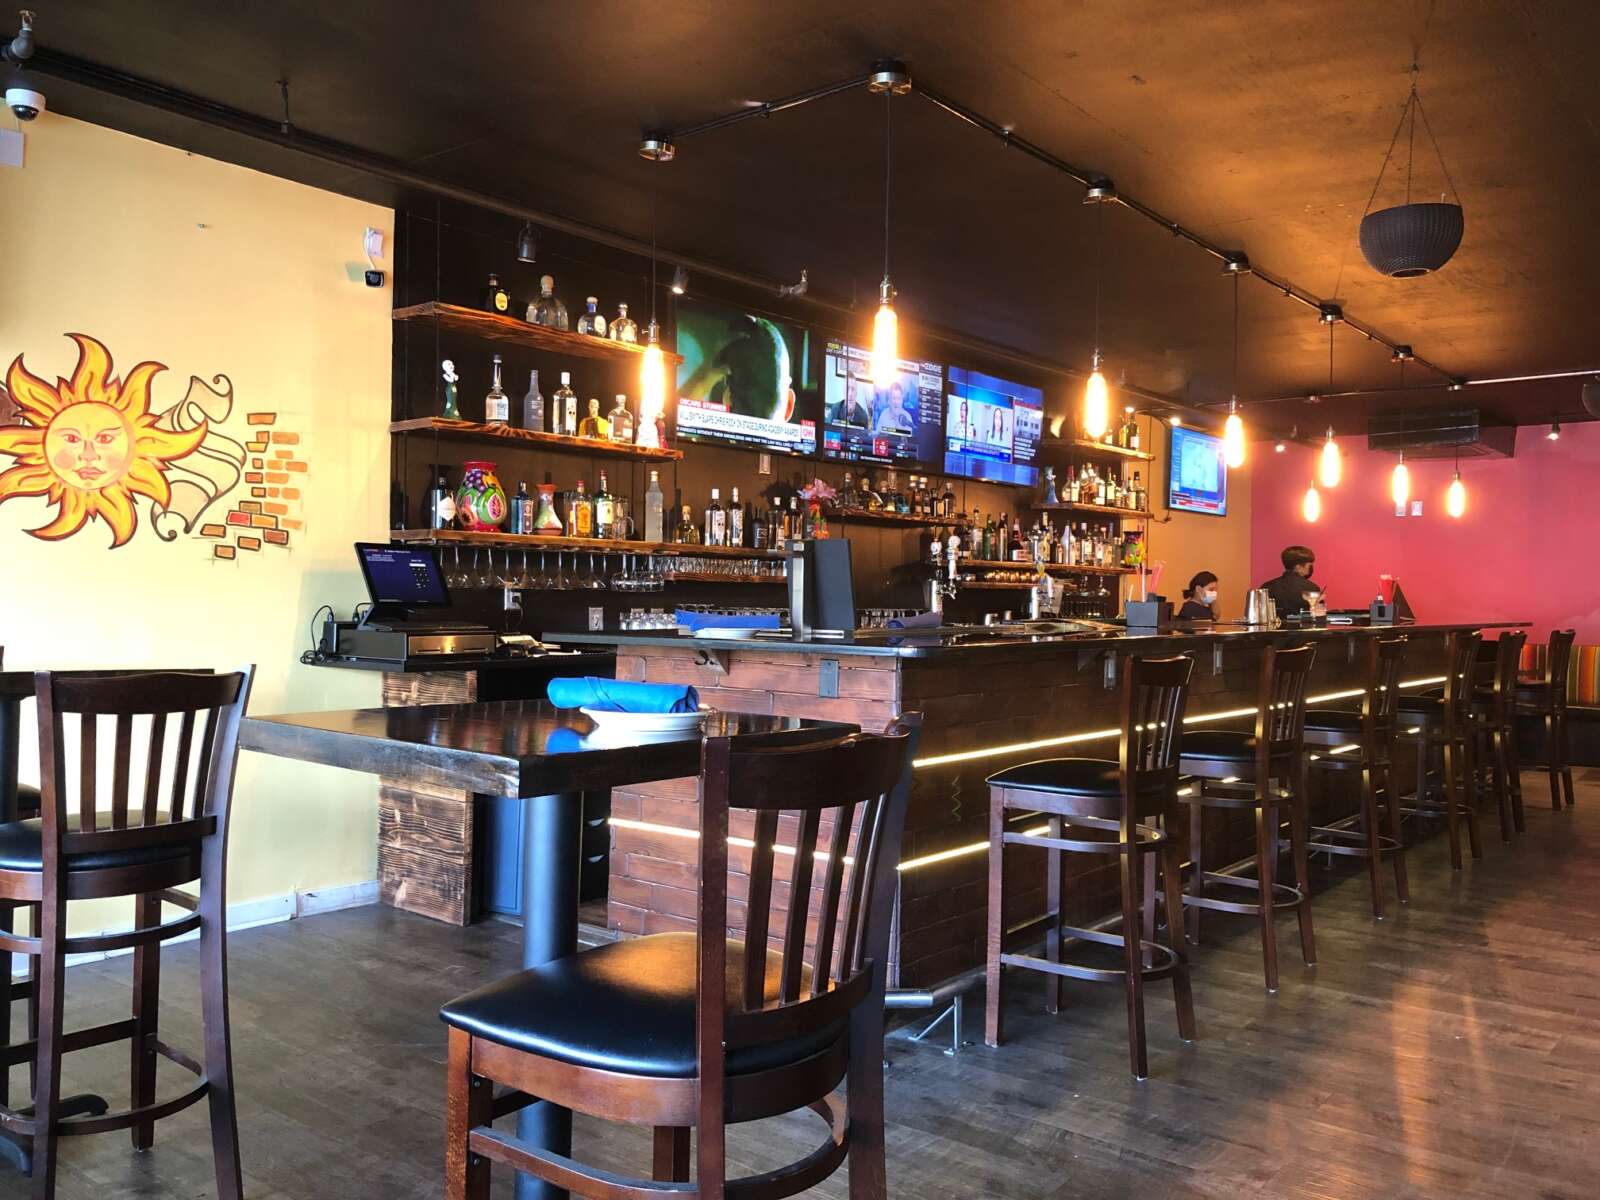 New Mexican restaurant and bar ‘El Sabor Grill’ now open in Vienna | FFXnow